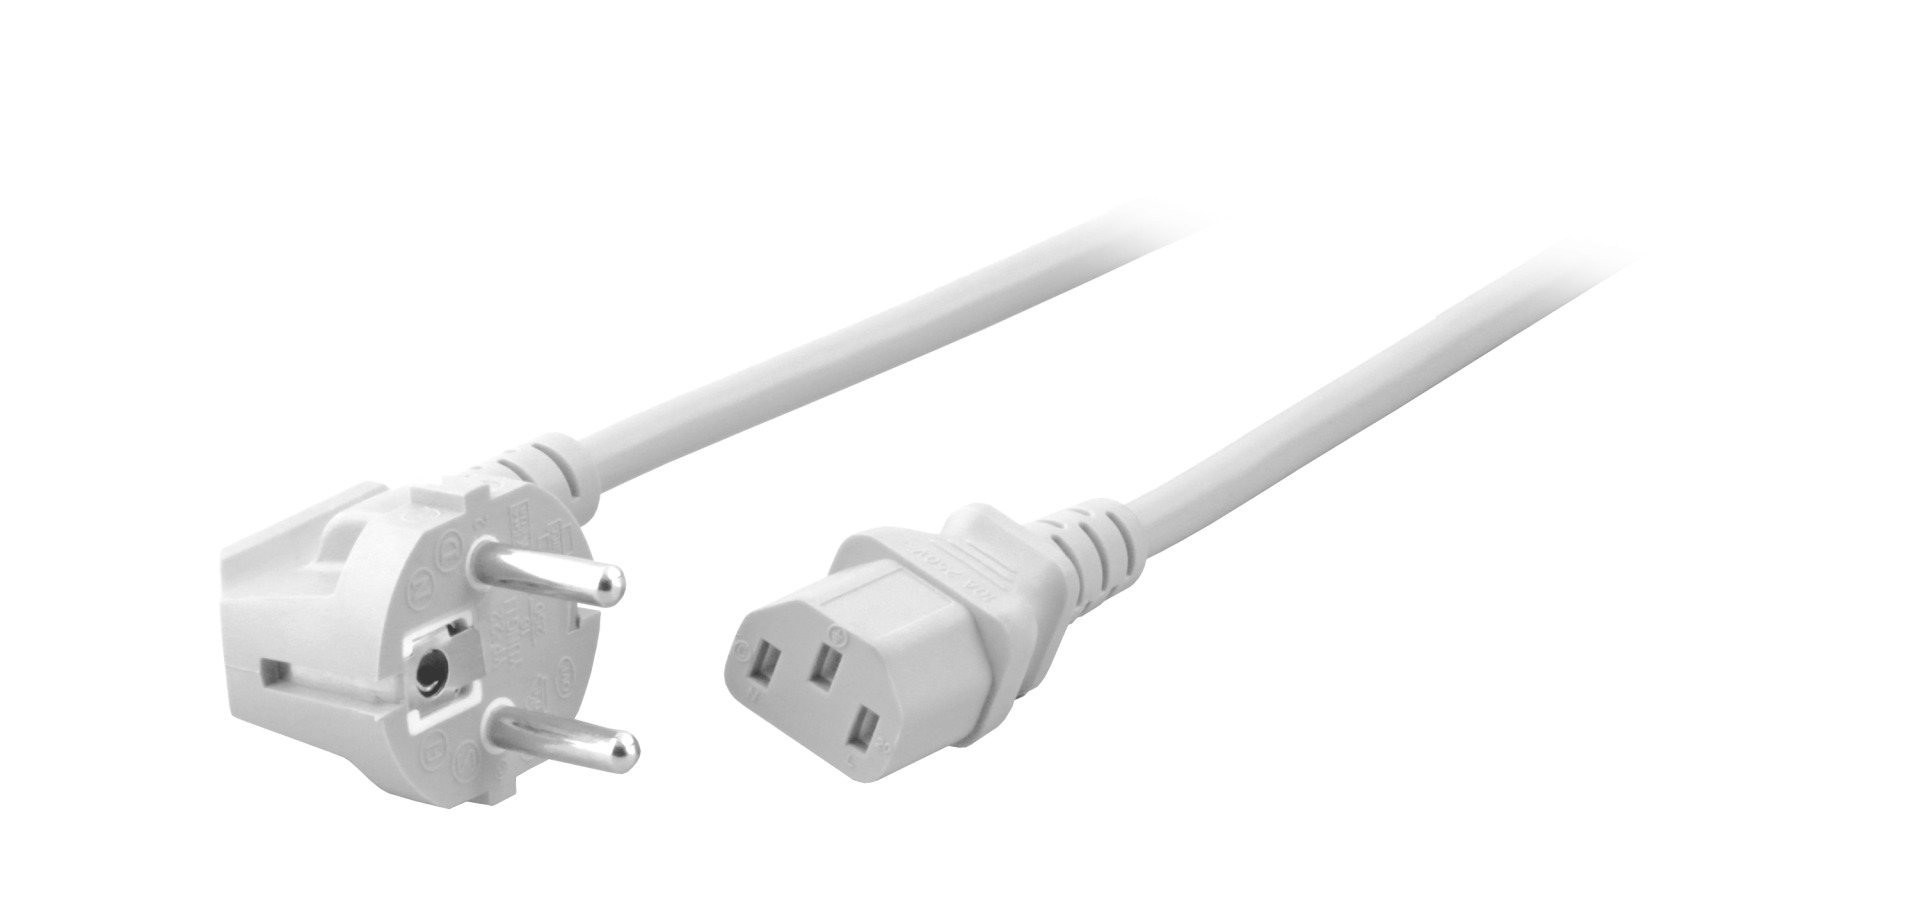 Power Cable CEE7/7 90° - C13 180°, White, 1.8 m, 3 x 0.75 mm²